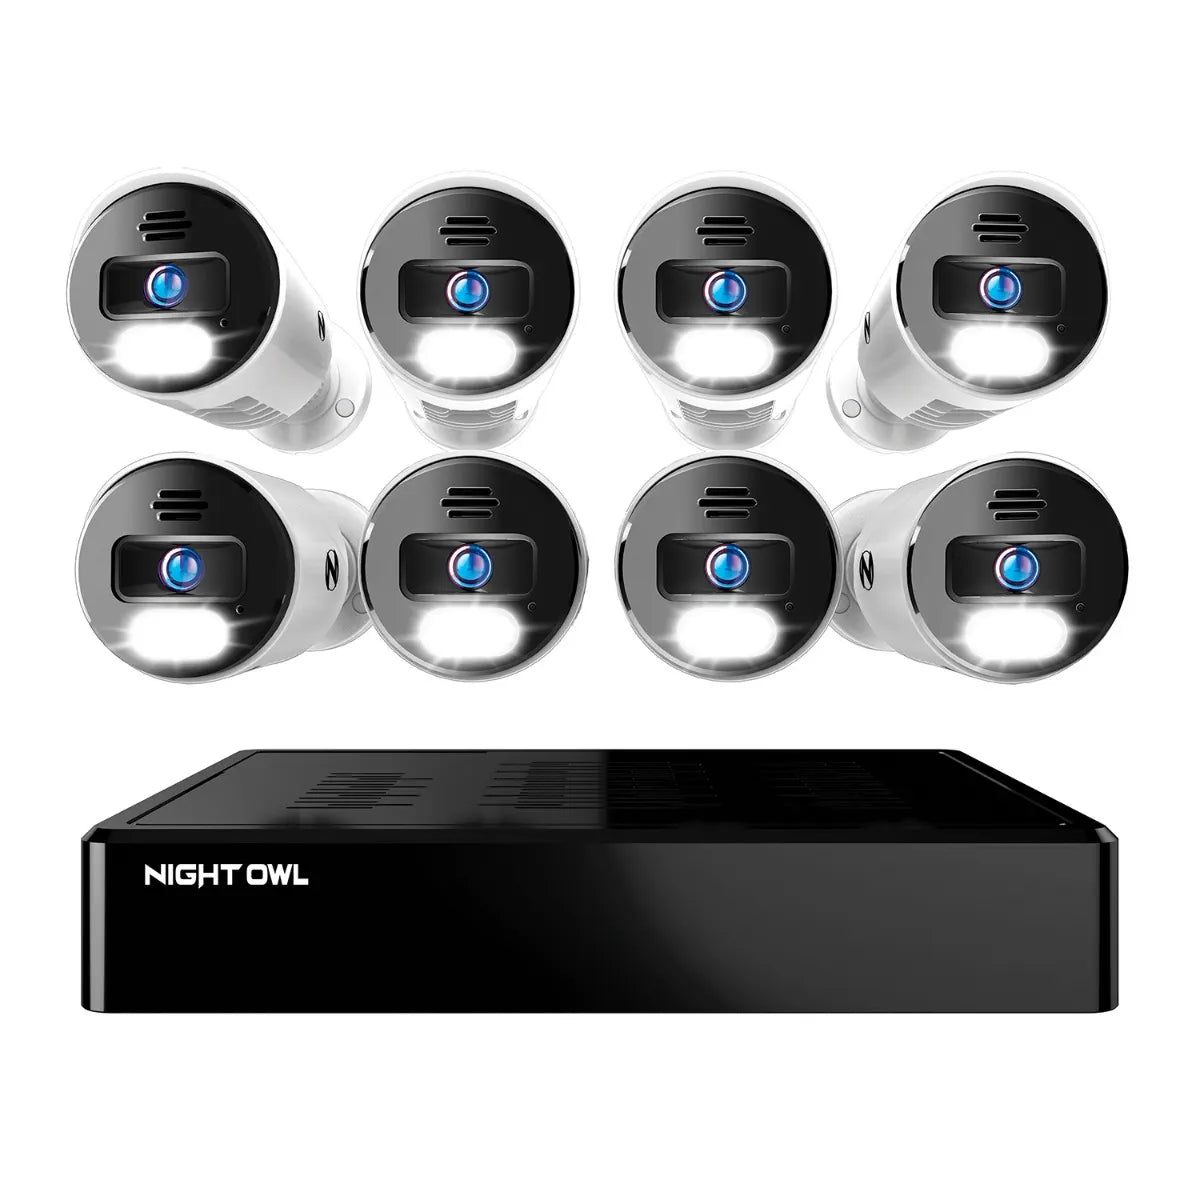 8 Channel 4K Bluetooth NVR with 2TB Hard Drive and 8 Wired IP 4K Spotlight Cameras with 2-Way Audio and Audio Alerts and Sirens